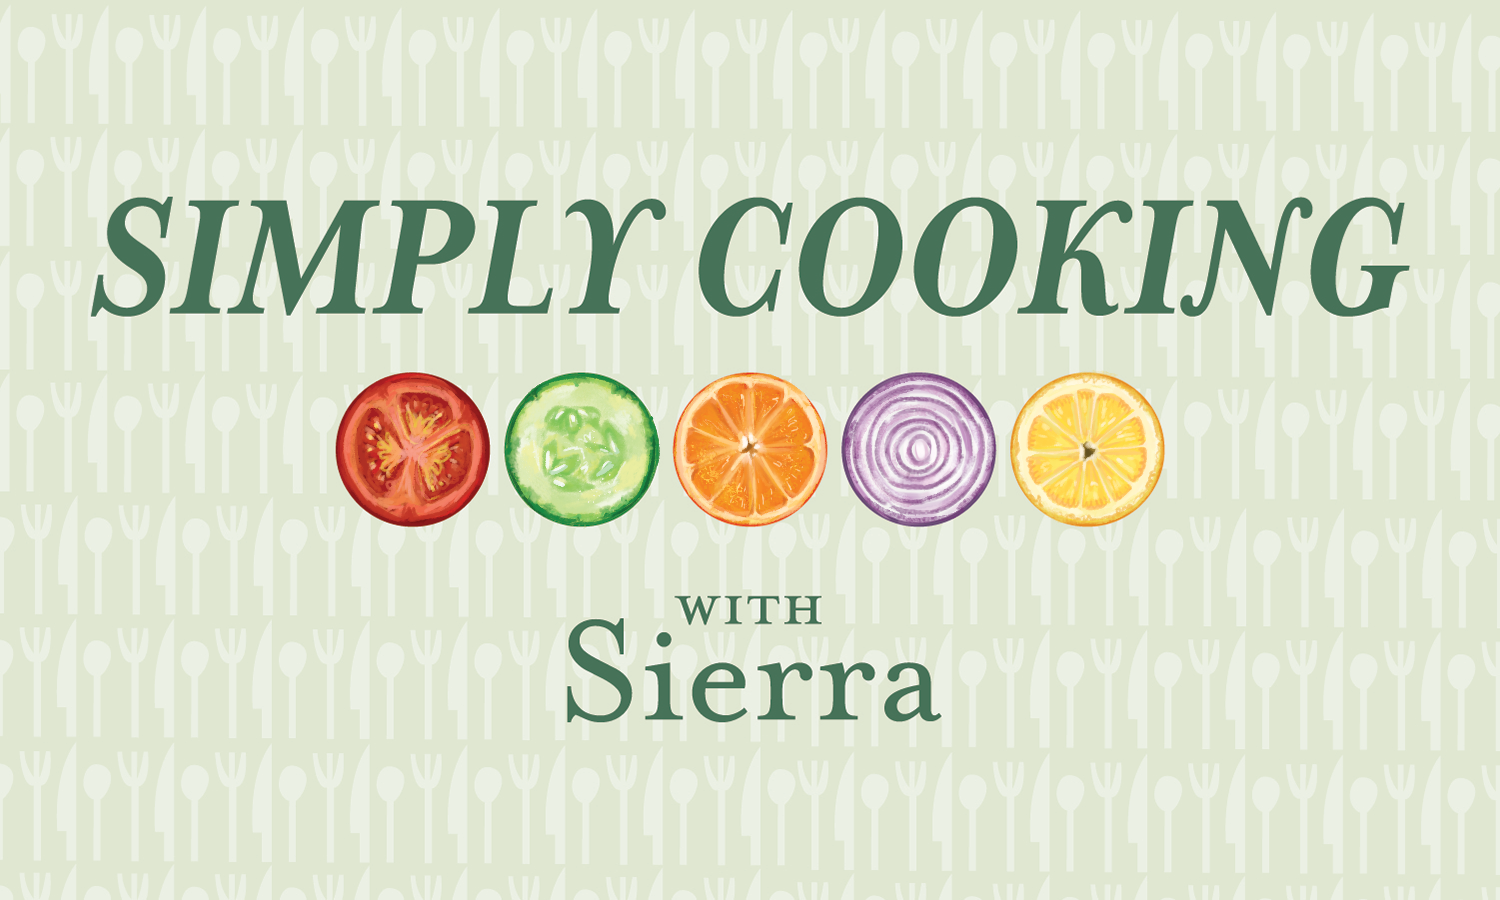 Graphic illustration for A&C column "Simply Cooking with Sierra" depicting cross sections of fruits and veggies